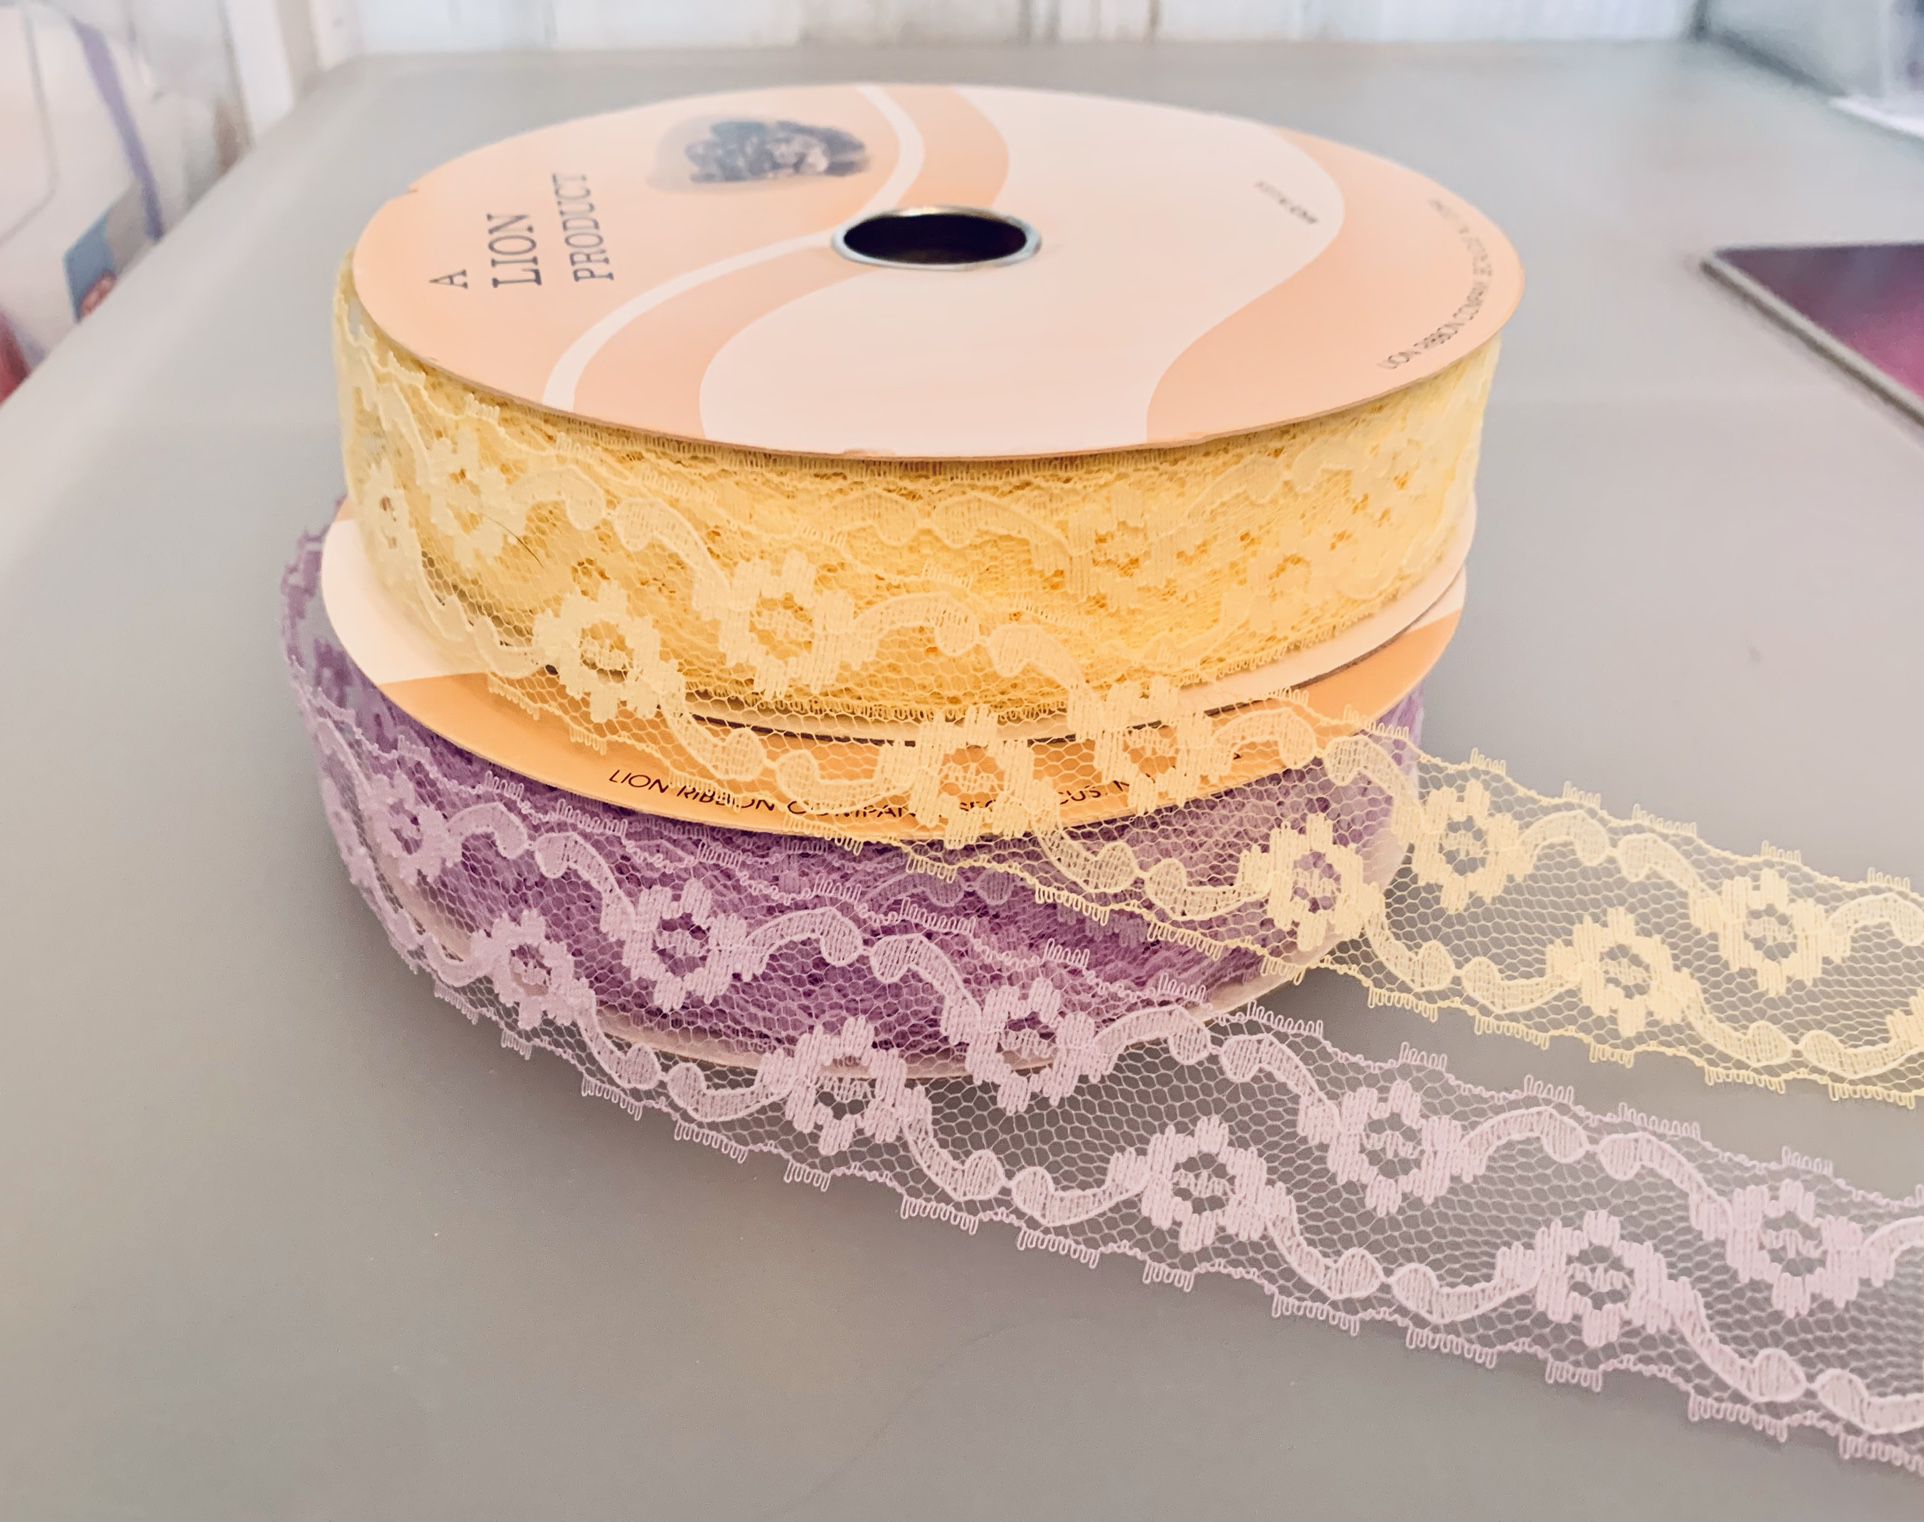 6 Yds of 1 3/8” Vintage Lace - Lavender or Yellow #040624A8 / #040624A9